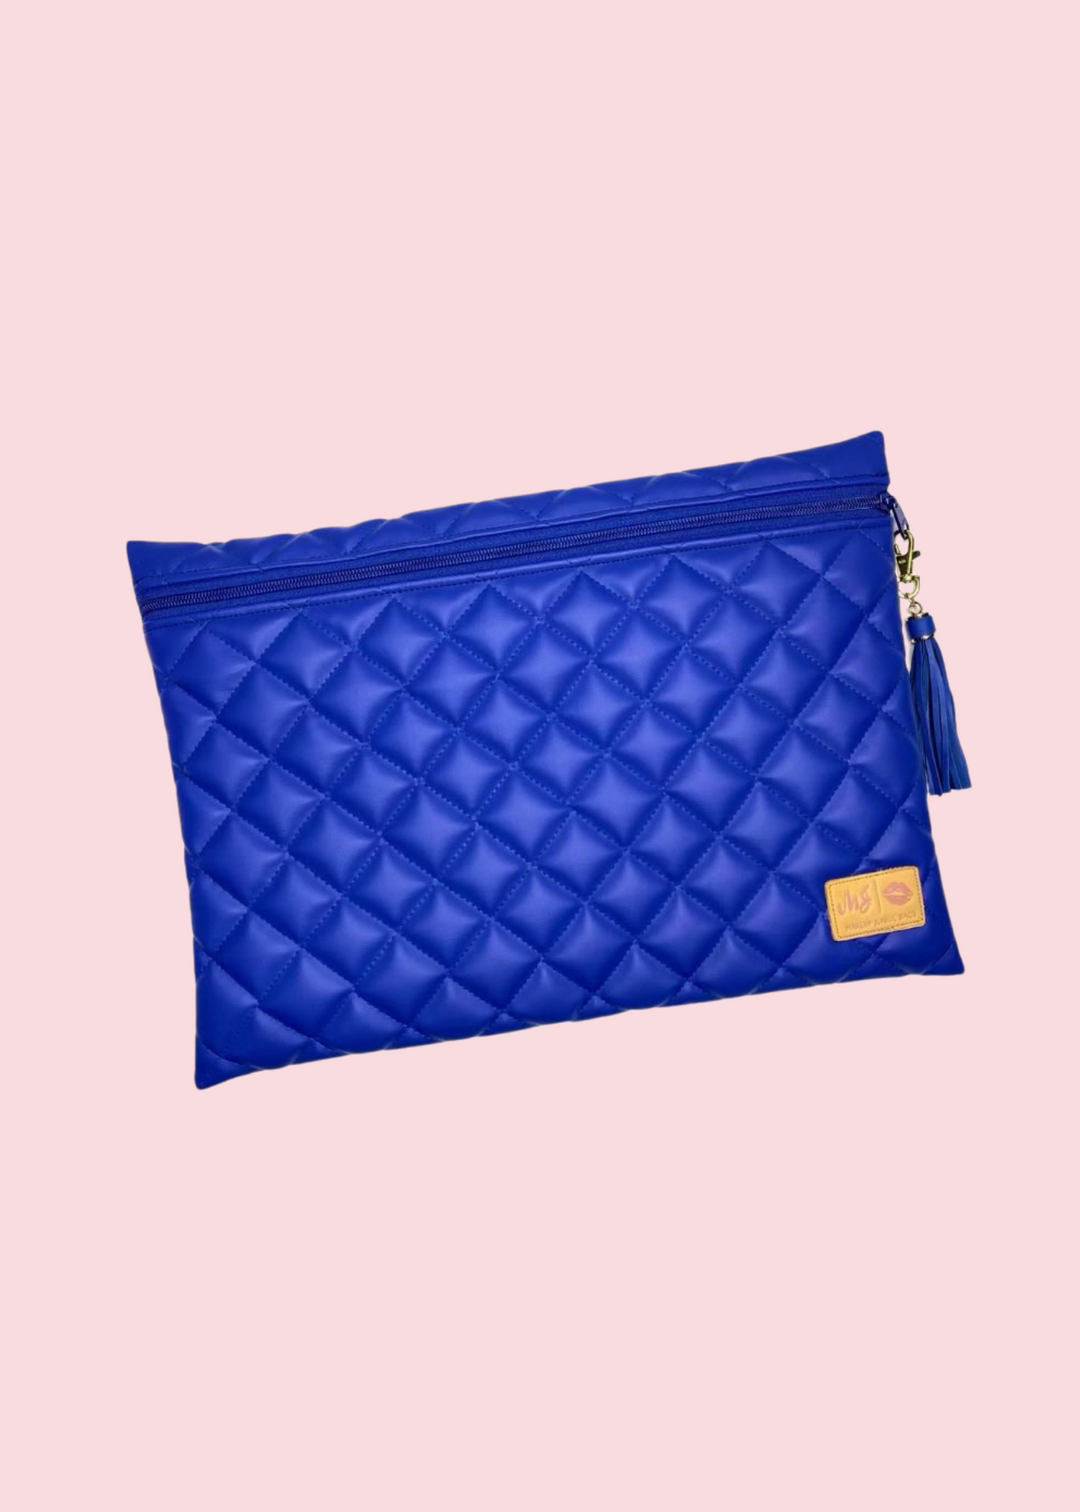 Makeup Junkie Bags - Luxe Cobalt Quilted Laptop Case [Pre-Order]